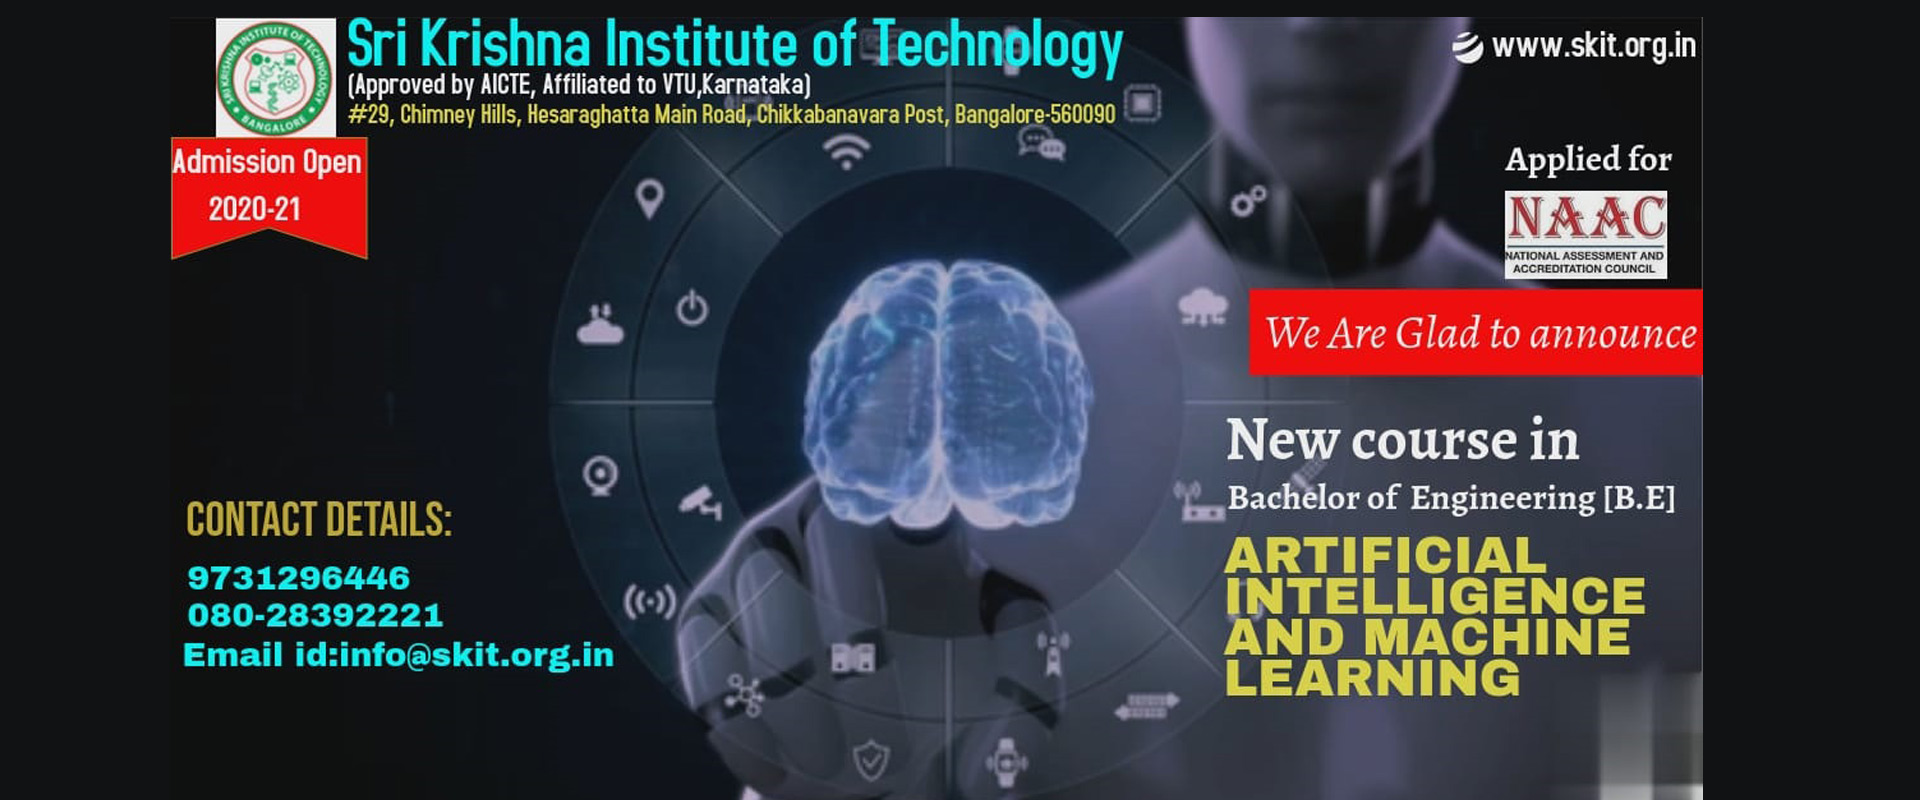 SKIT, Bangalore offers a new course artificial intelligence and machine learning